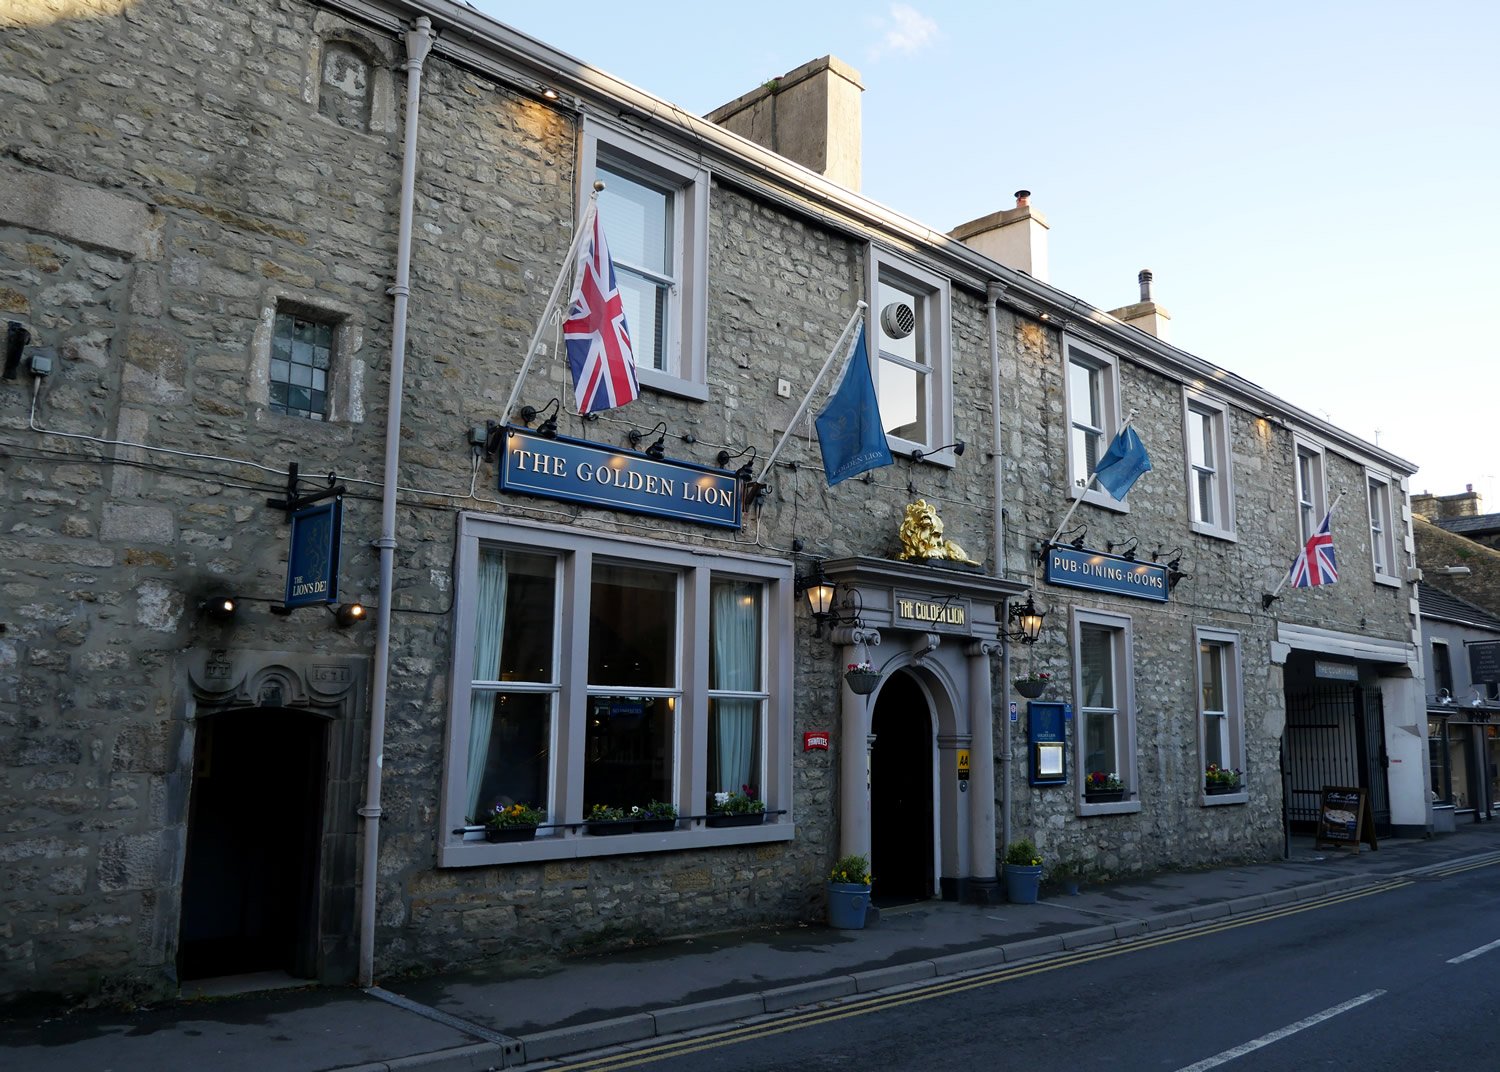 Image name The Golden Lion at Settle the 8 image from the post Walk: Settle (The Golden Lion) in Yorkshire.com.